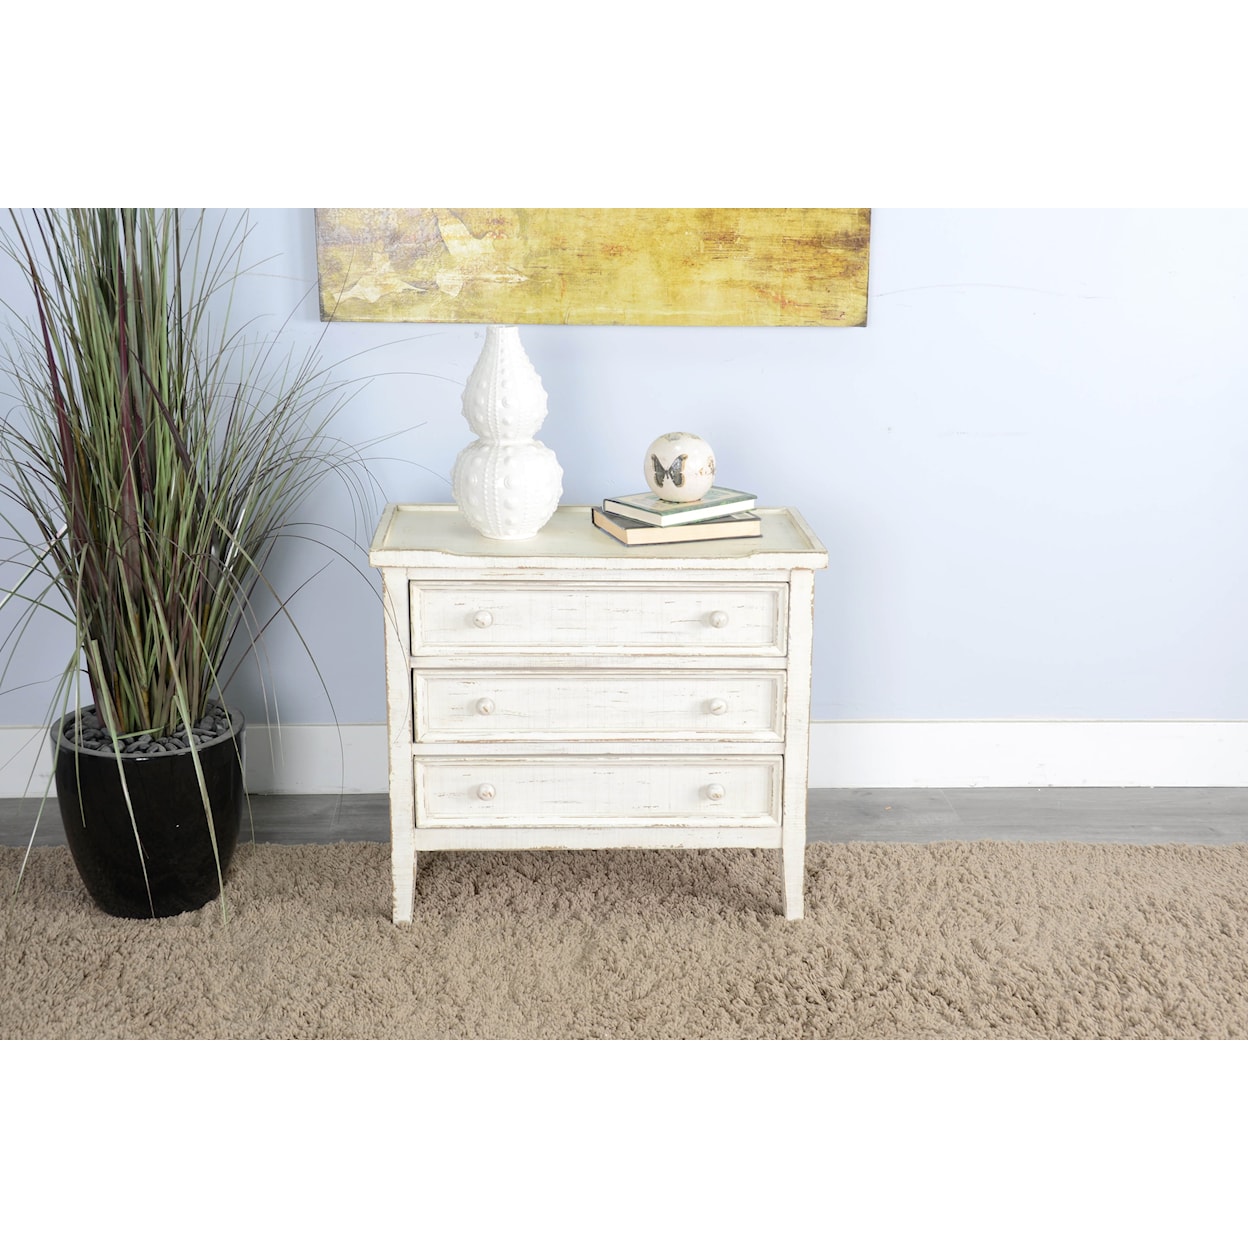 Sunny Designs Marina End Table with Drawers